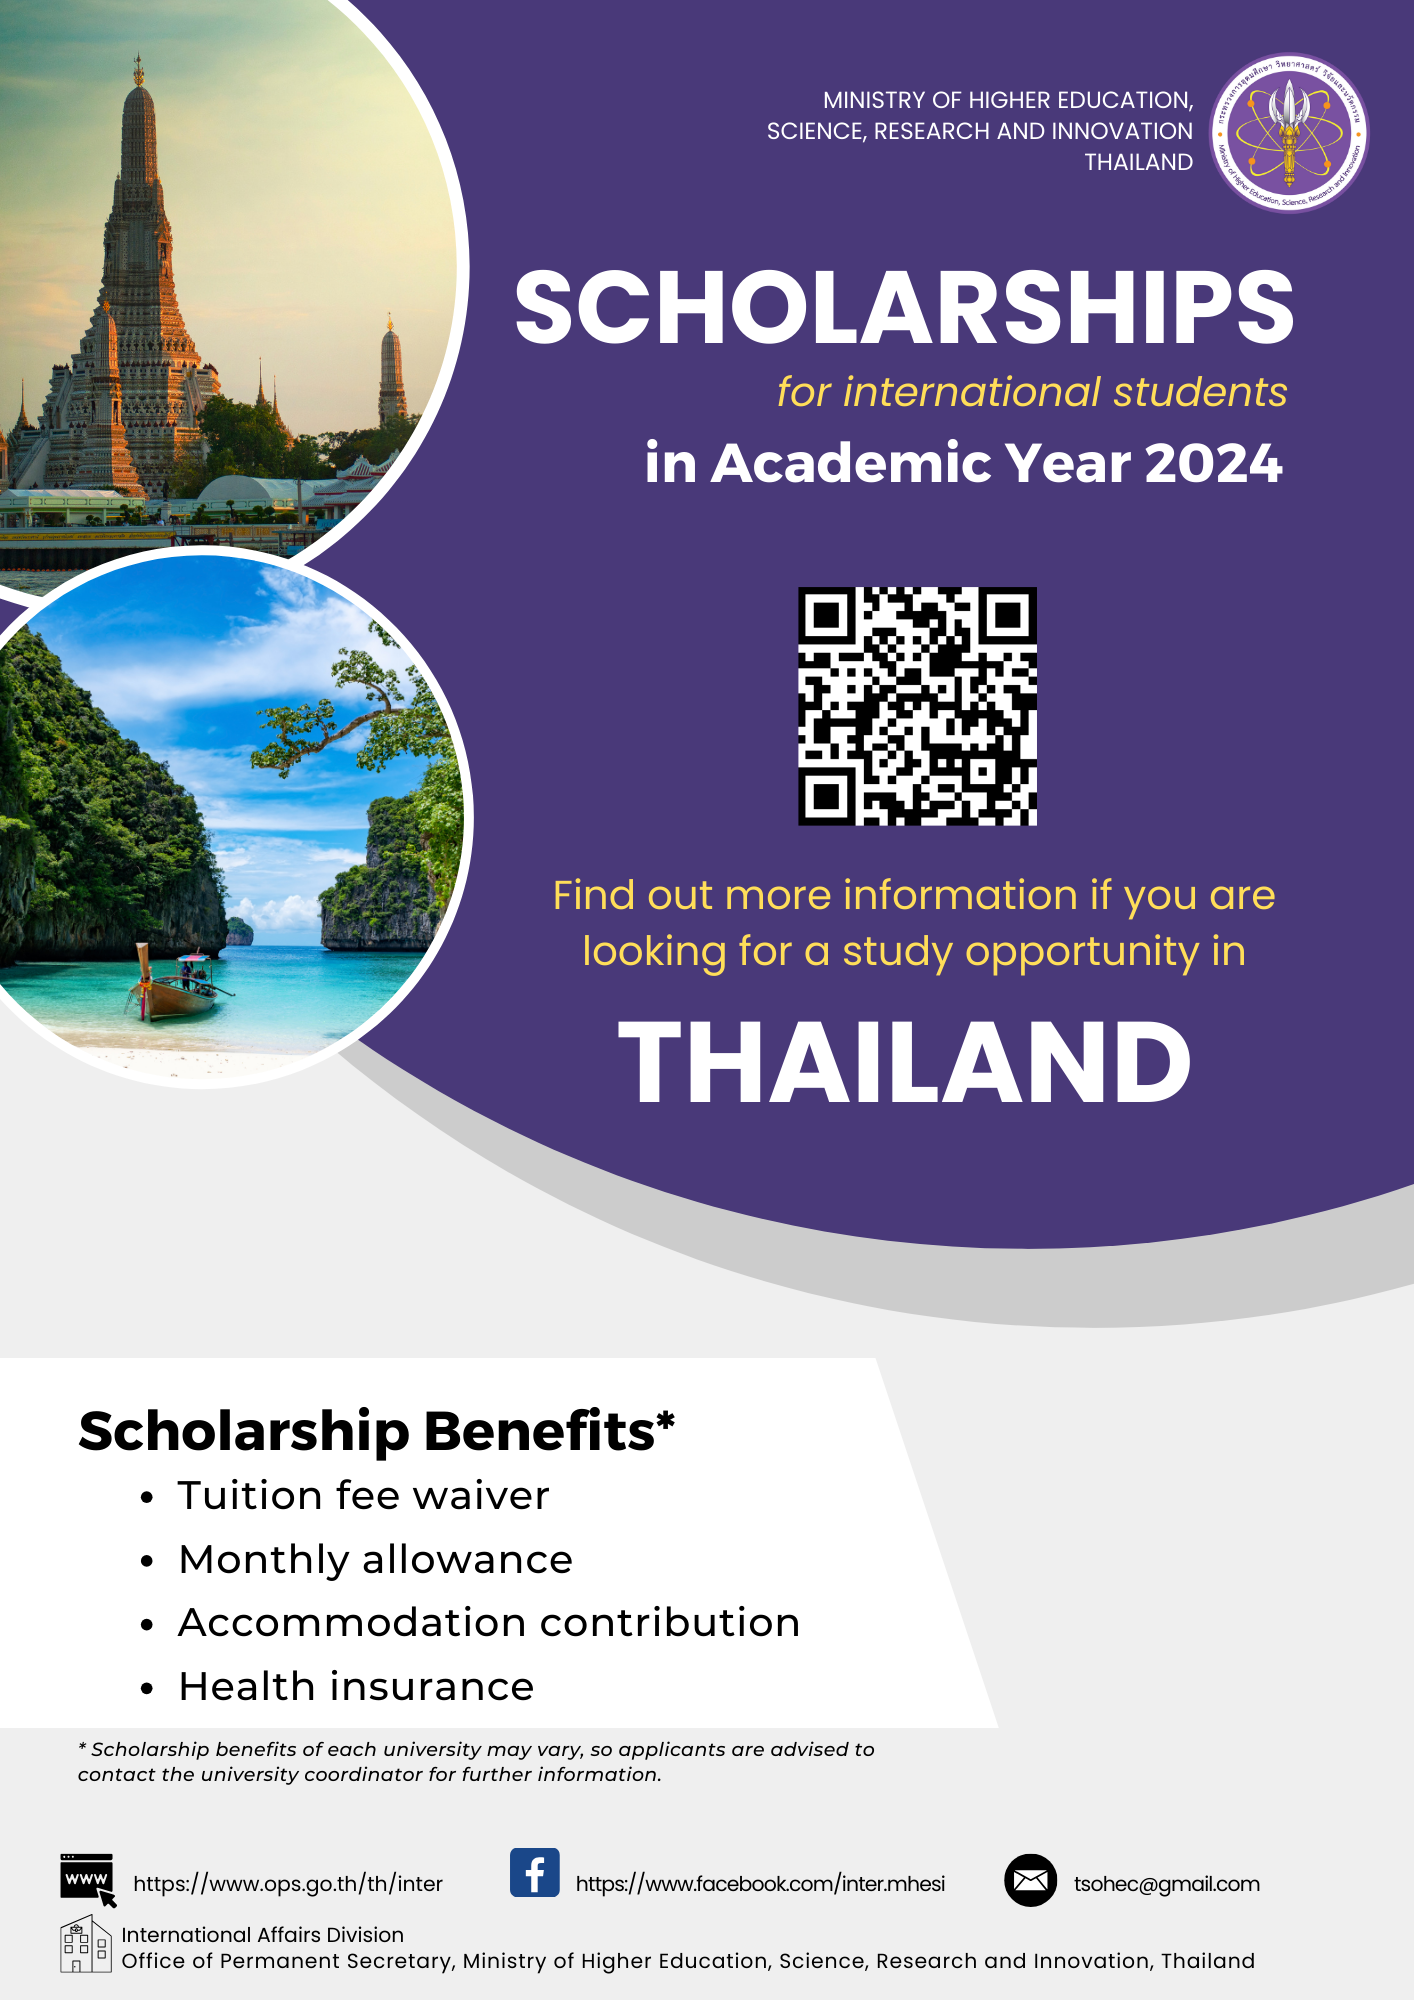 LIST OF SCHOLARSHIPS OFFERED BY THAI HIGHER EDUCATION INSTITUTIONS FOR INTERNATIONAL STUDENTS IN ACADEMIC YEAR 2024